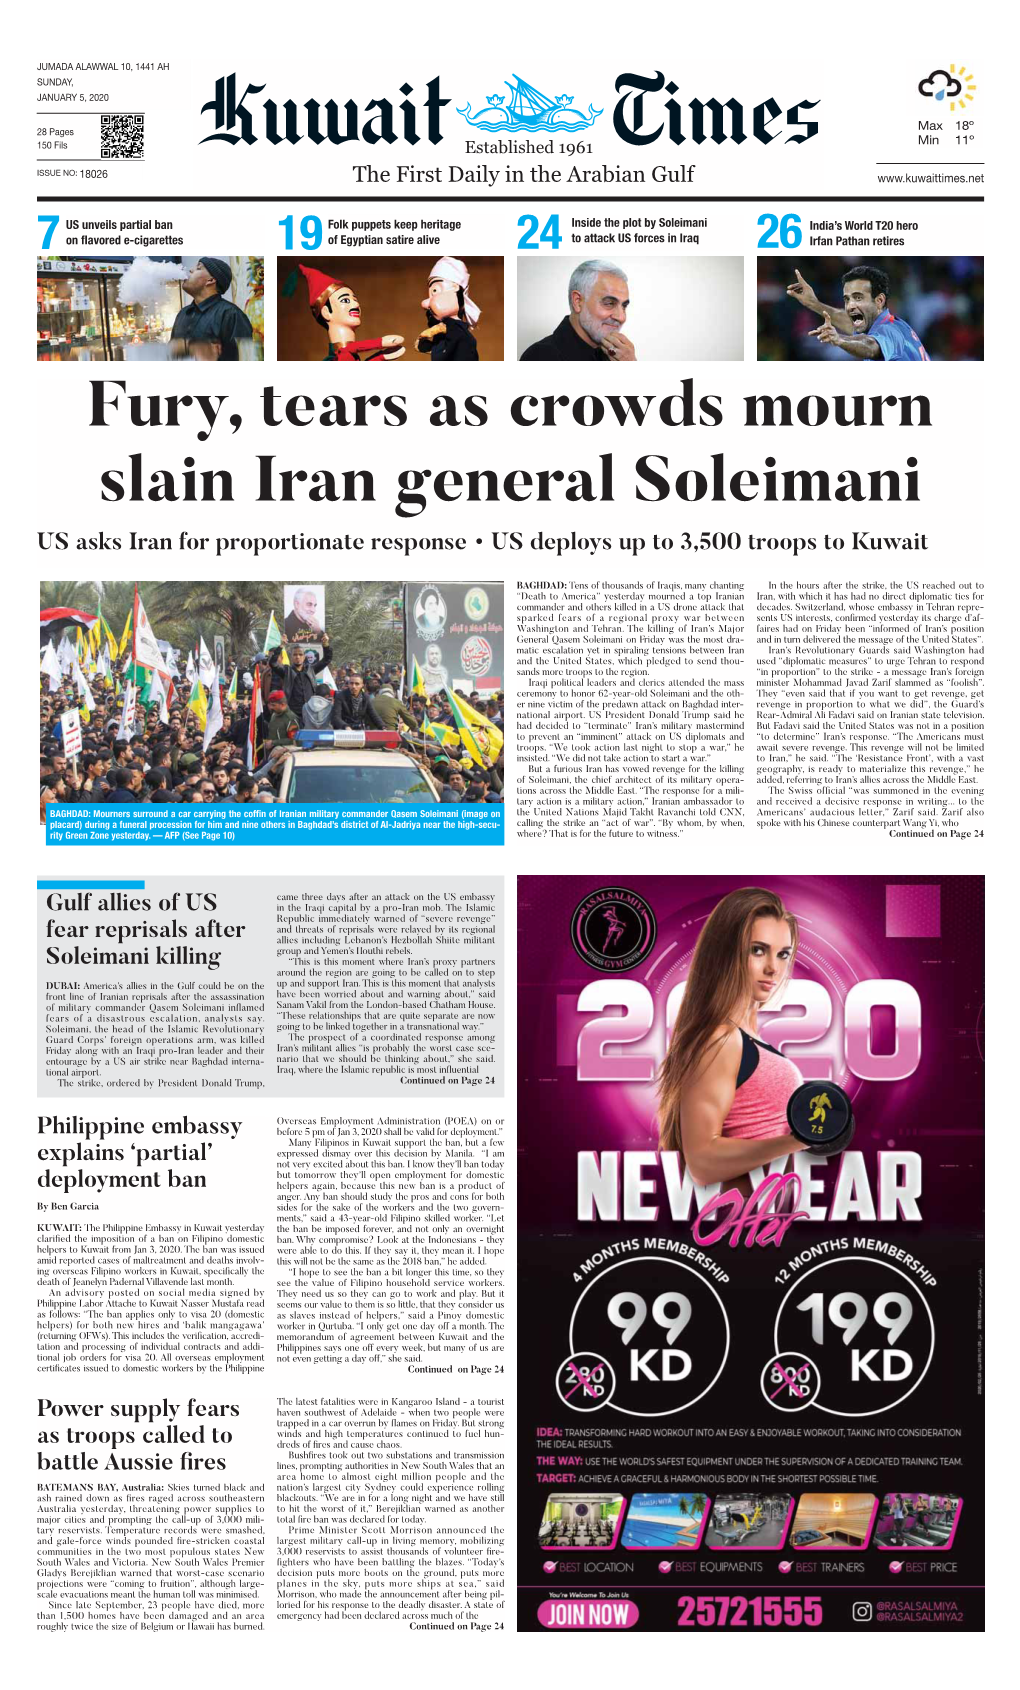 Fury, Tears As Crowds Mourn Slain Iran General Soleimani US Asks Iran for Proportionate Response • US Deploys up to 3,500 Troops to Kuwait